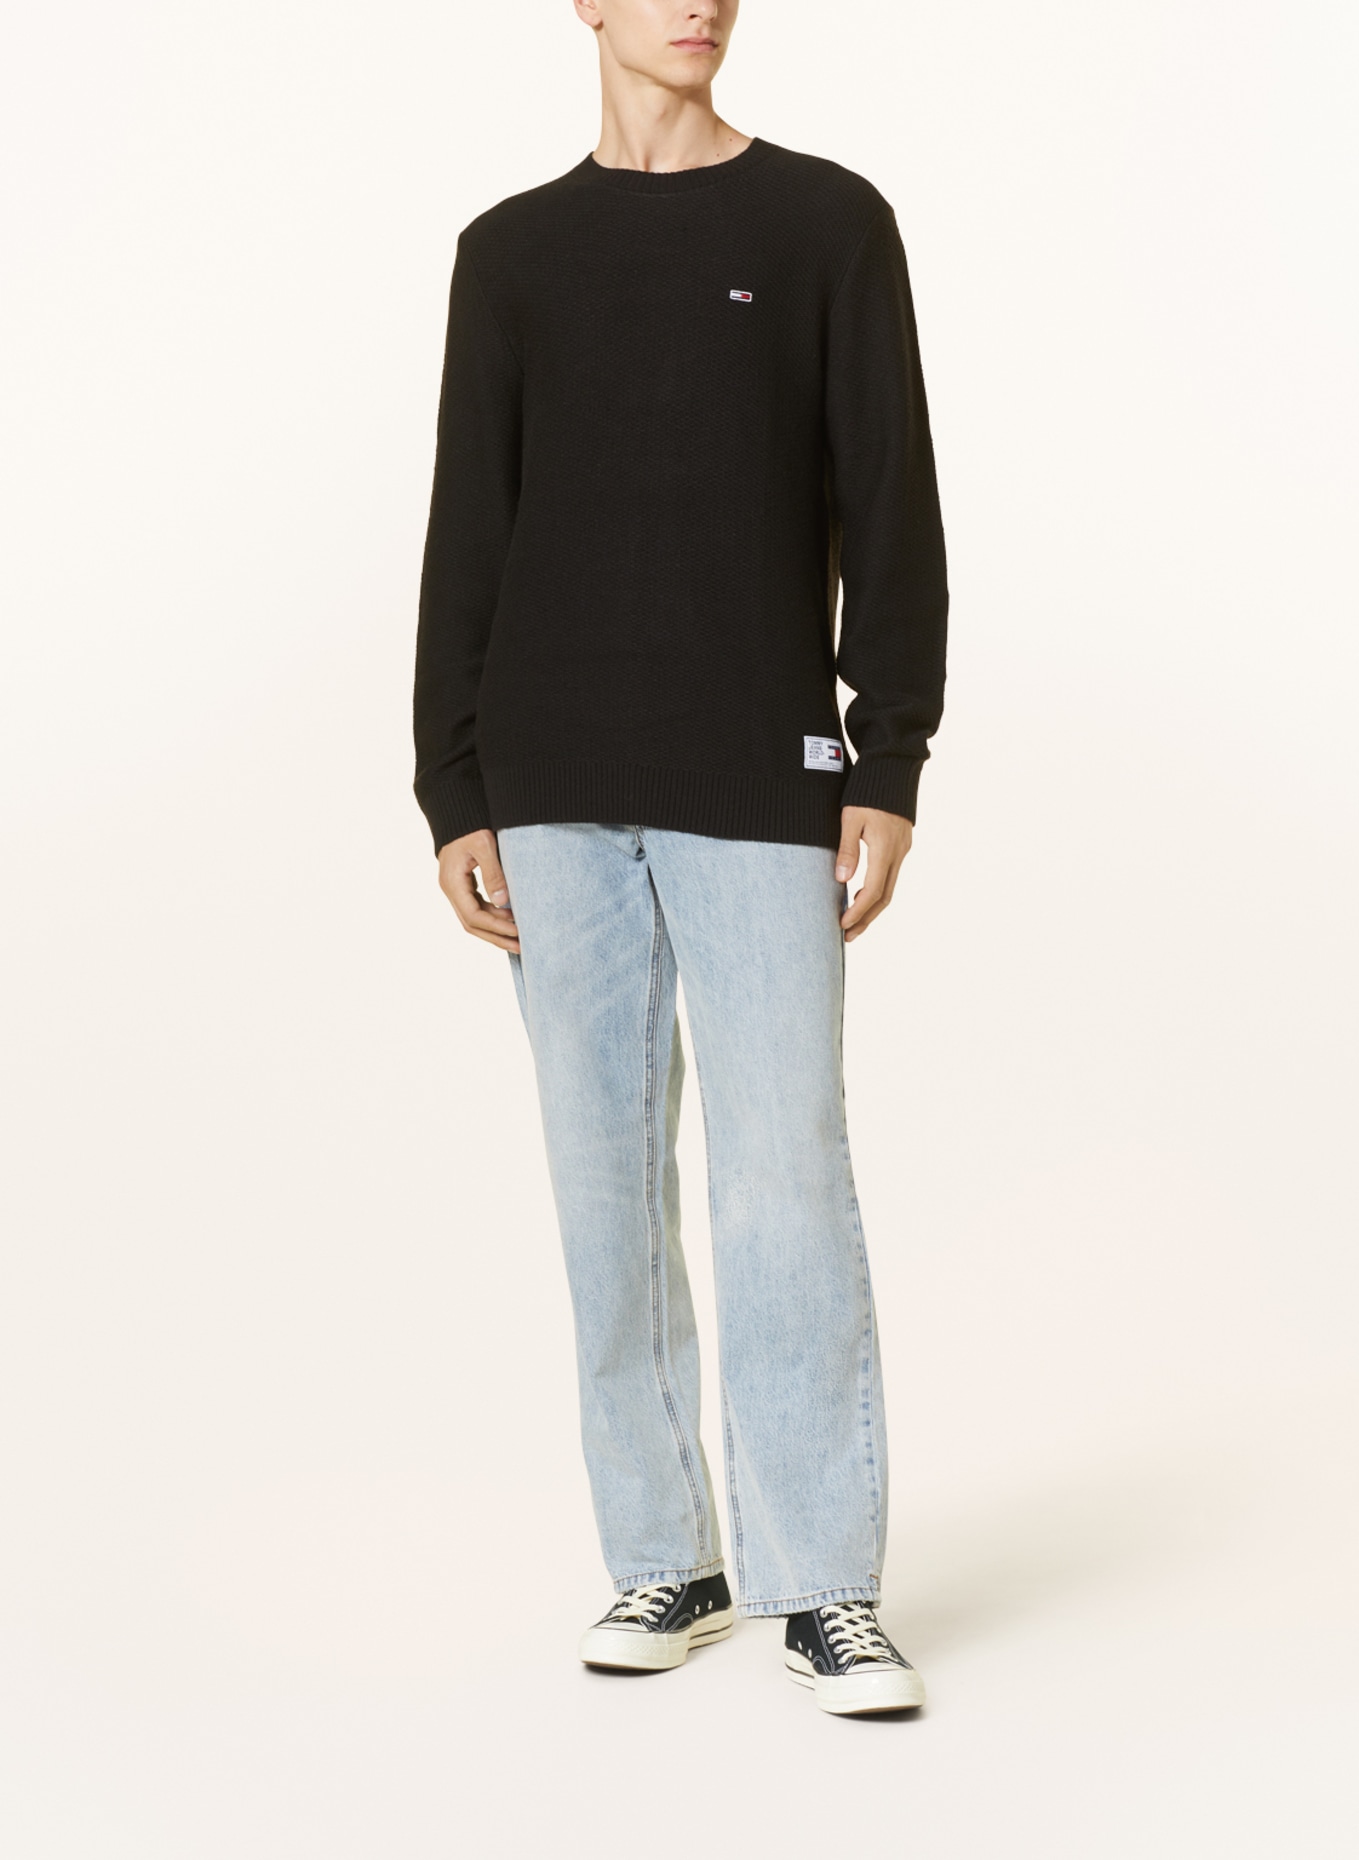 TOMMY JEANS Sweater, Color: BLACK (Image 2)